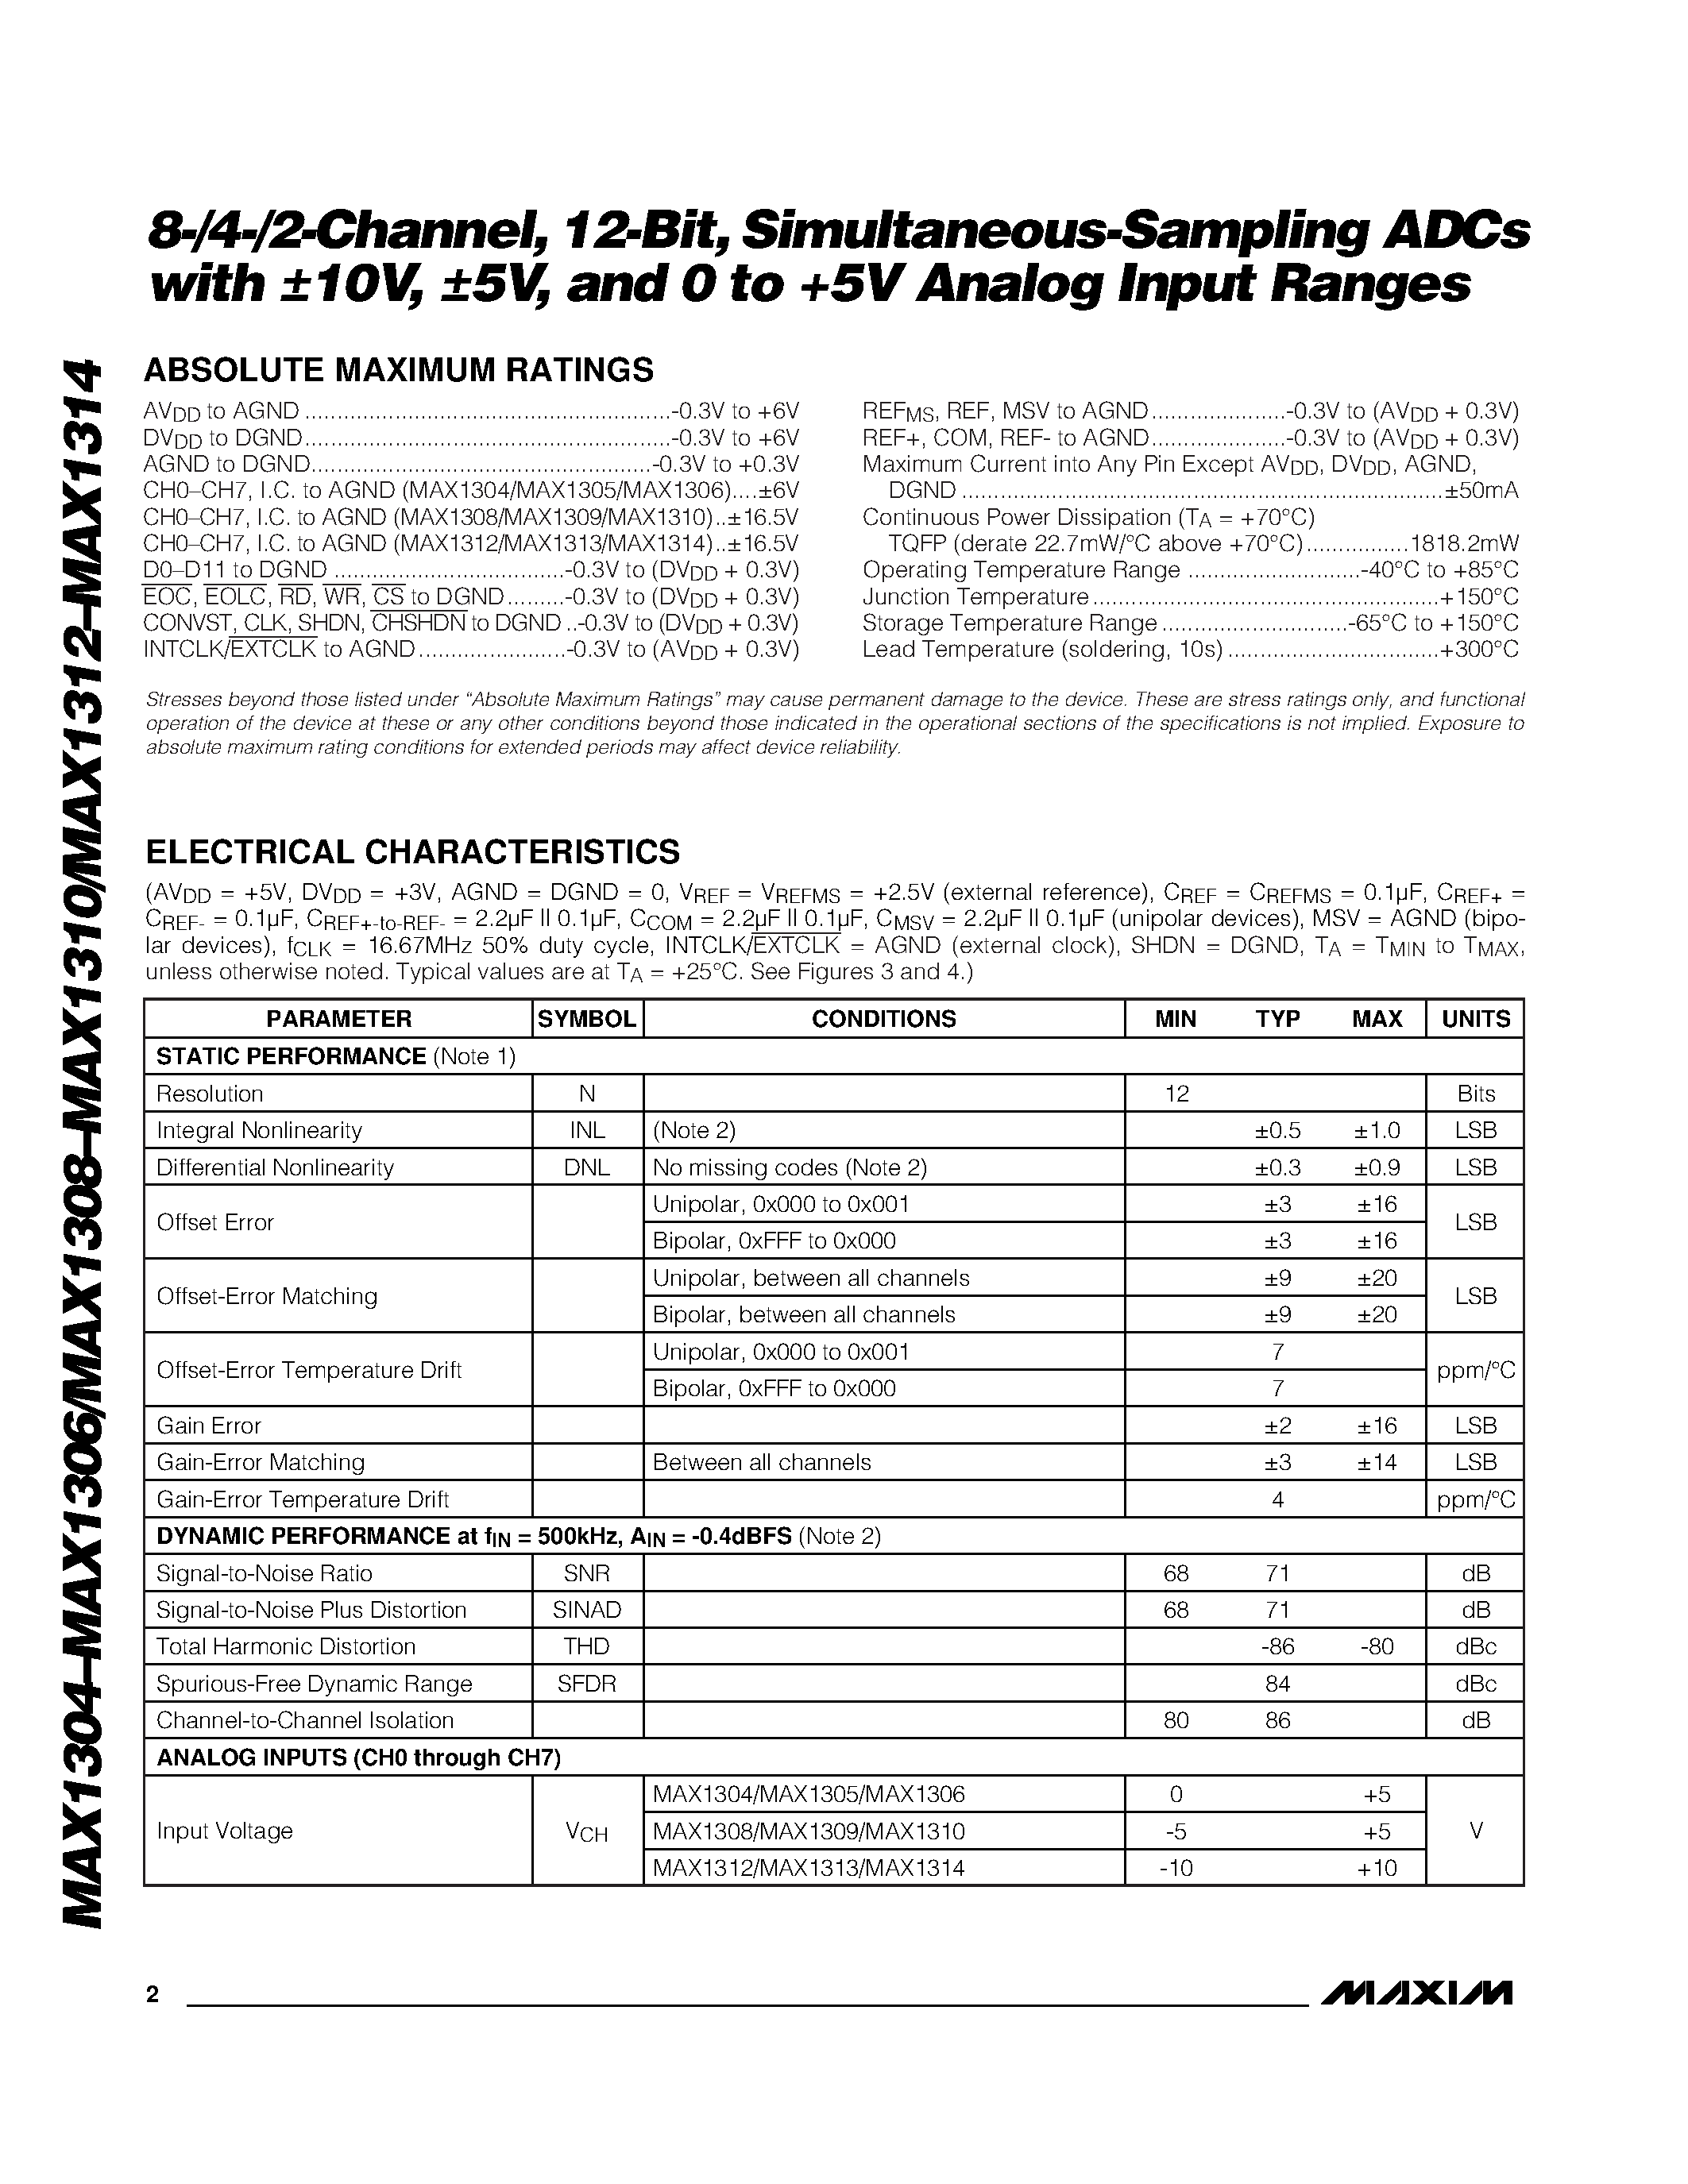 Datasheet MAX1308ECM - 8-/4-/2-Channel / 12-Bit / Simultaneous-Sampling ADCs with 10V / 5V / and 0 to +5V Analog Input Ranges page 2